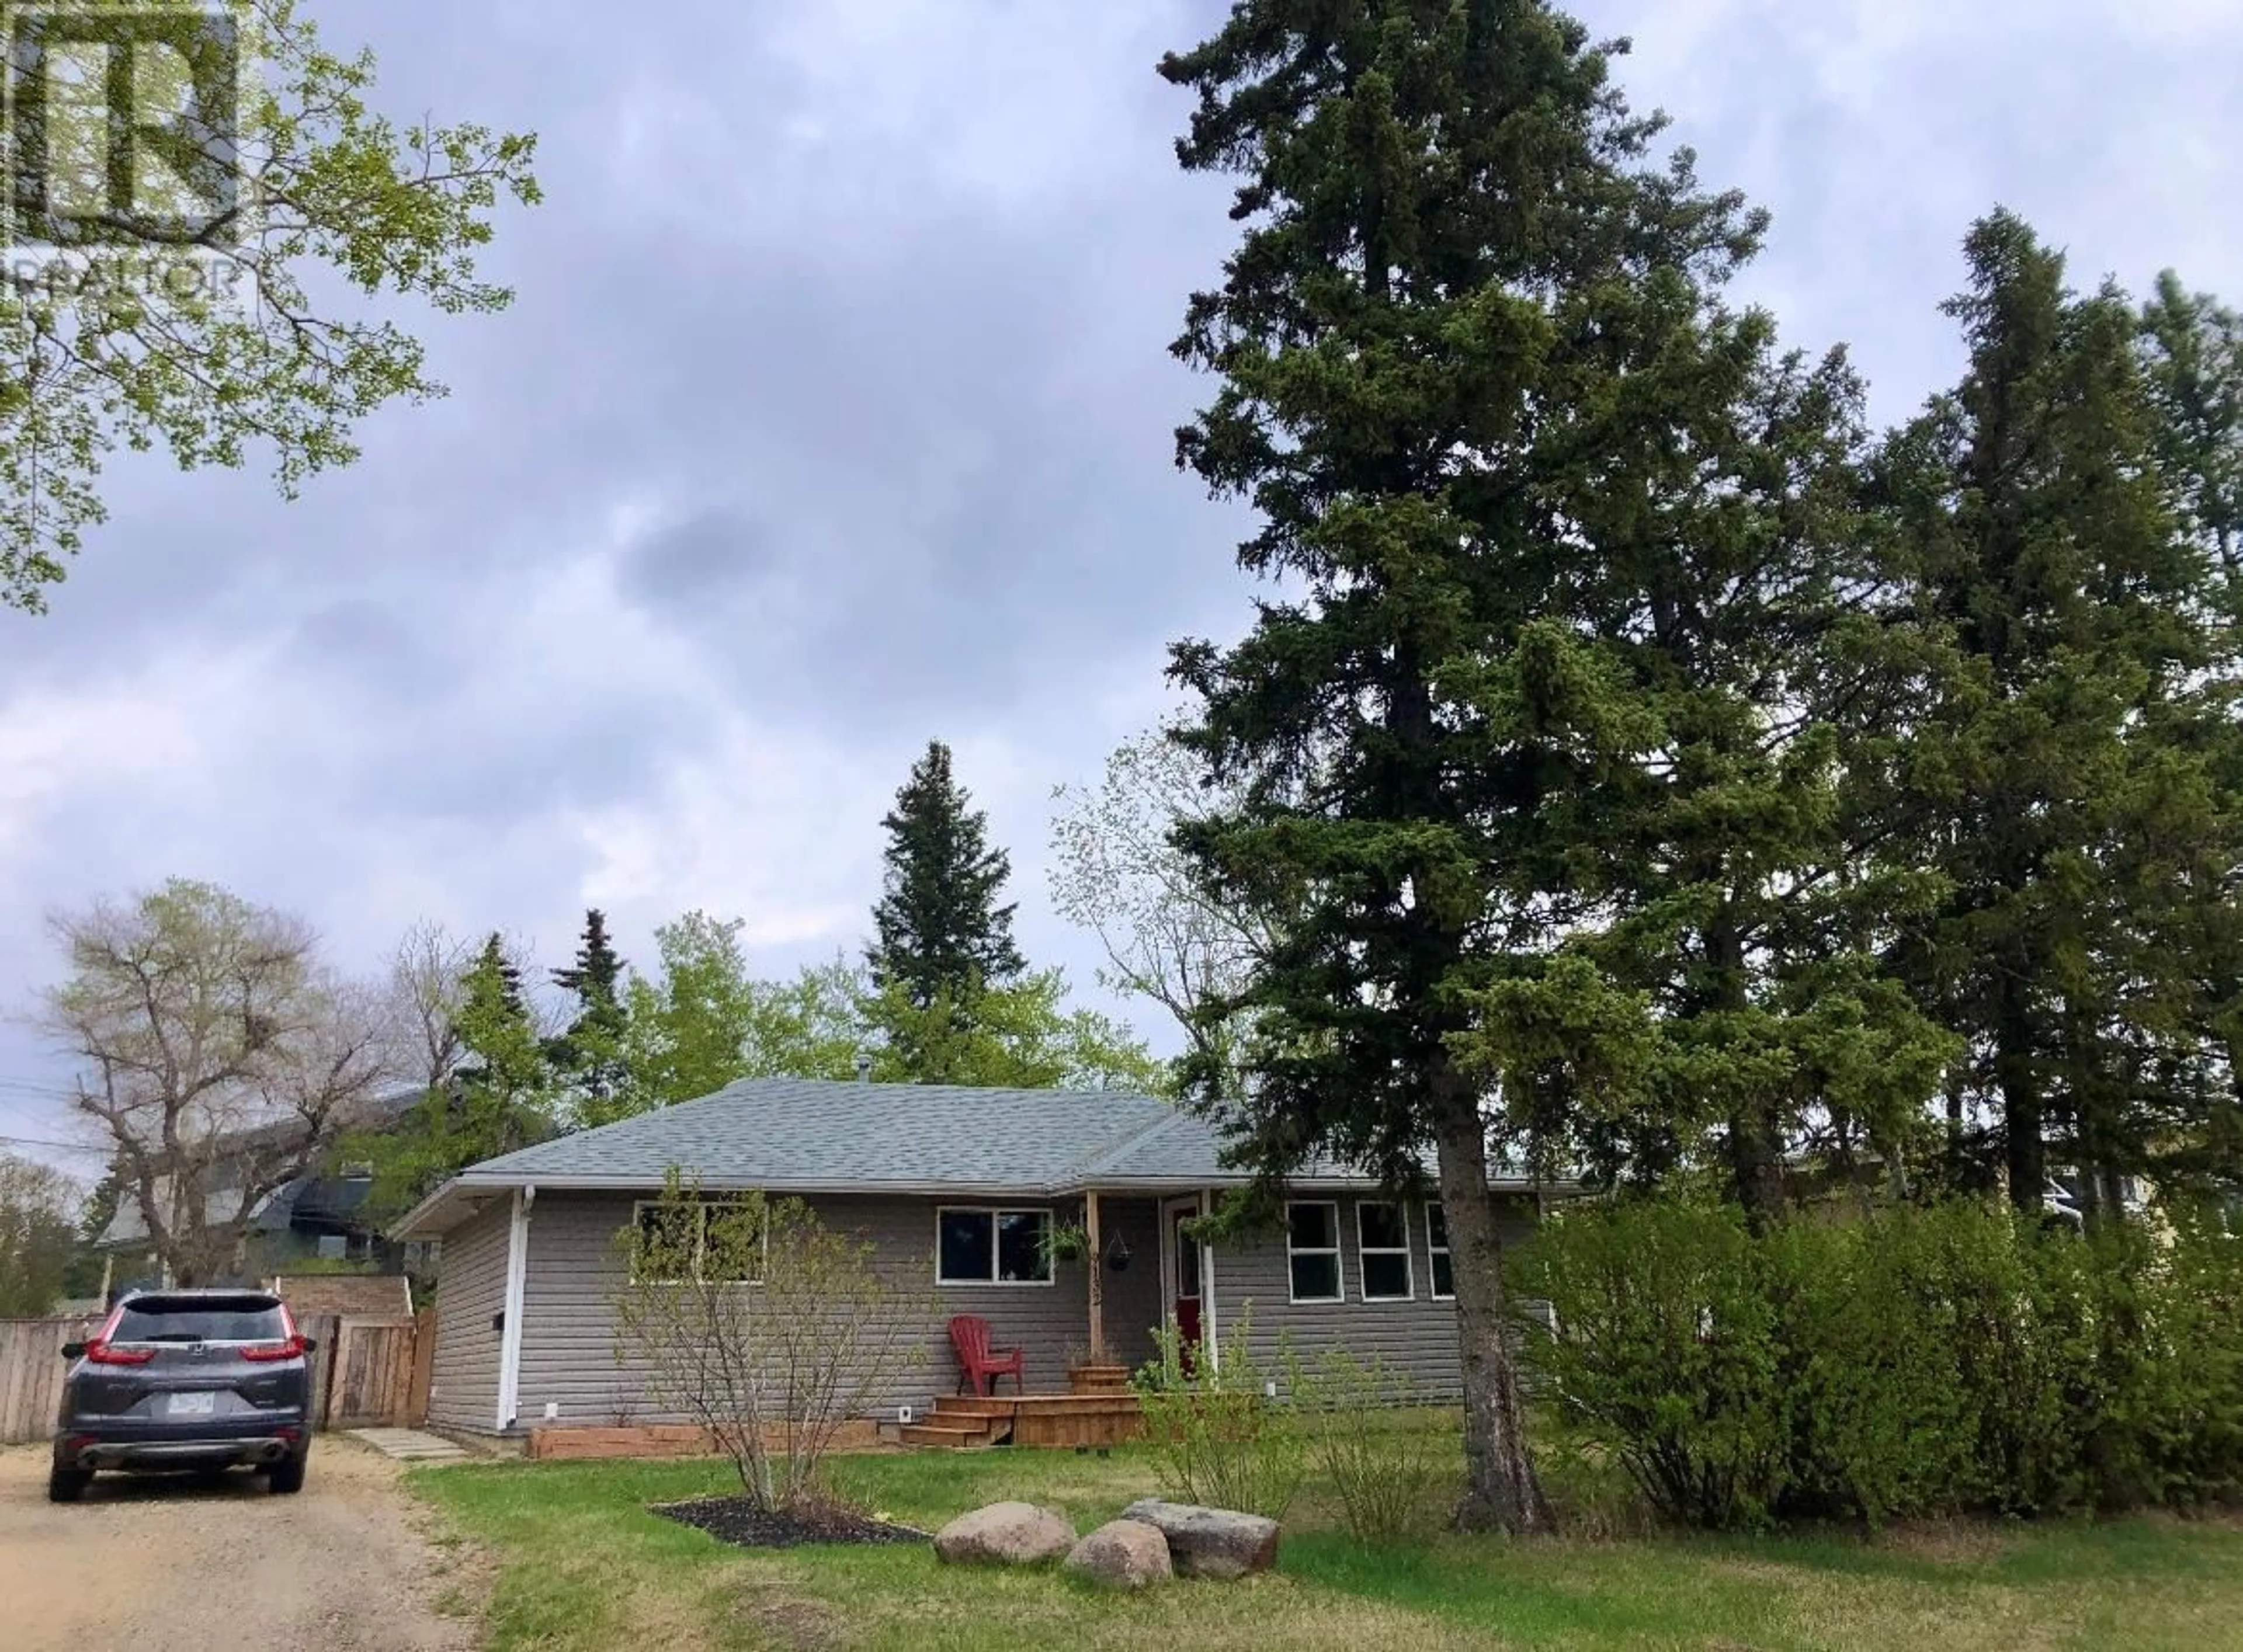 Frontside or backside of a home for 9132 9 Street, Dawson Creek British Columbia V1G3S1